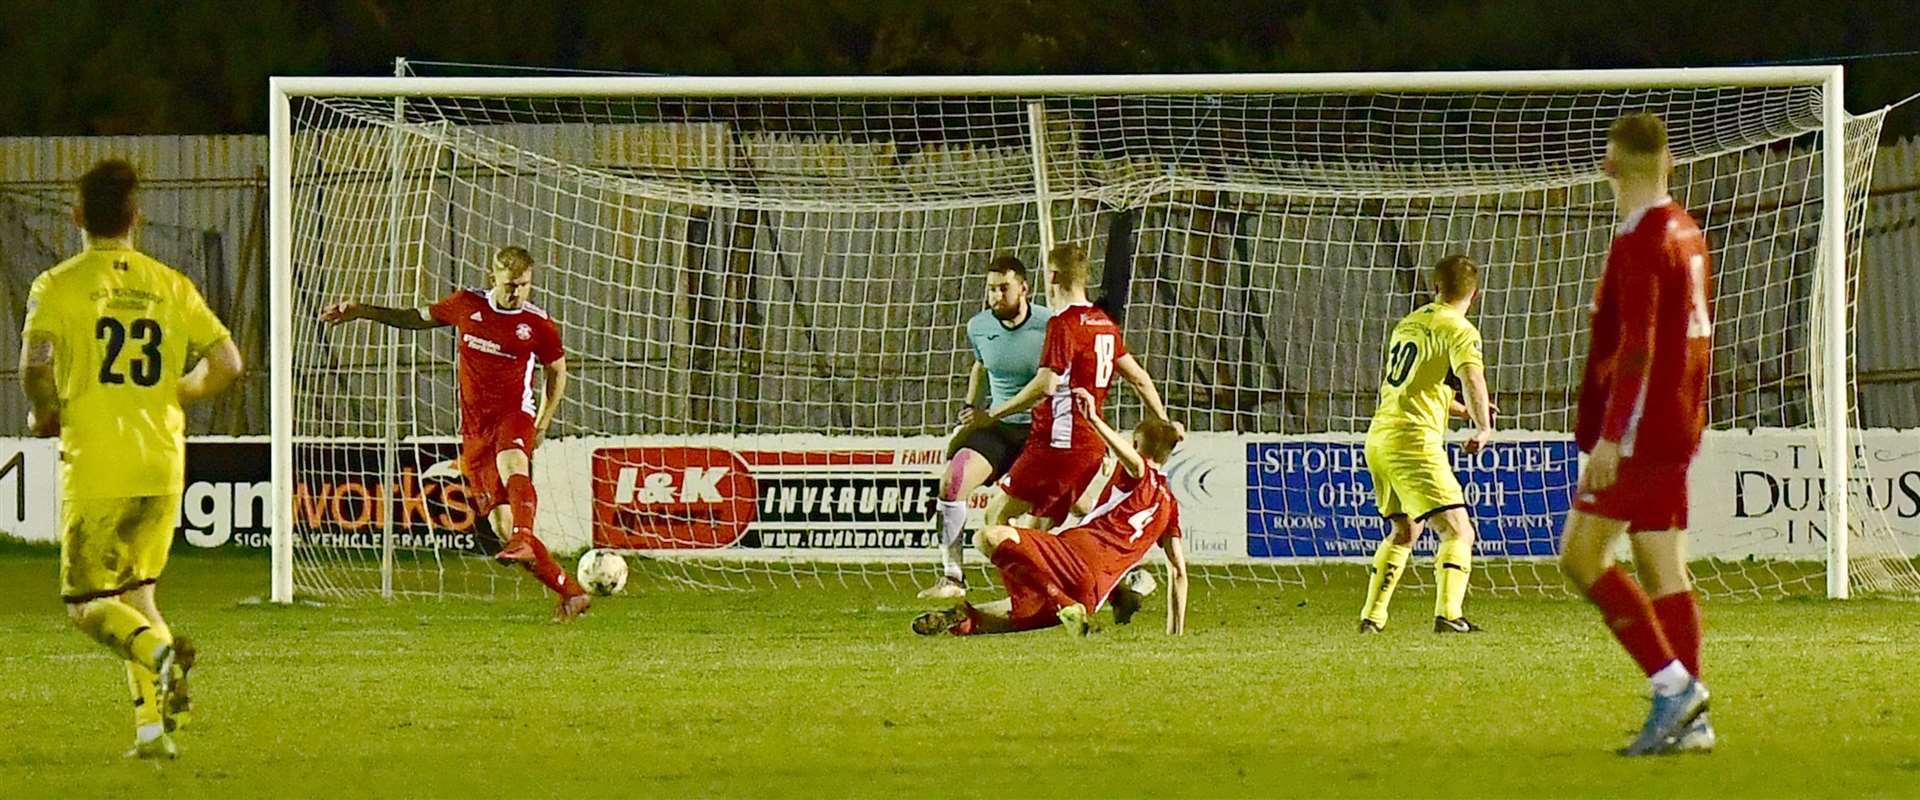 Richard Macadie (No 10) scoring in stoppage time in a 2-0 win at Lossiemouth in January 2020. This was Macadie's most recent goal for Academy. Picture: Mel Roger